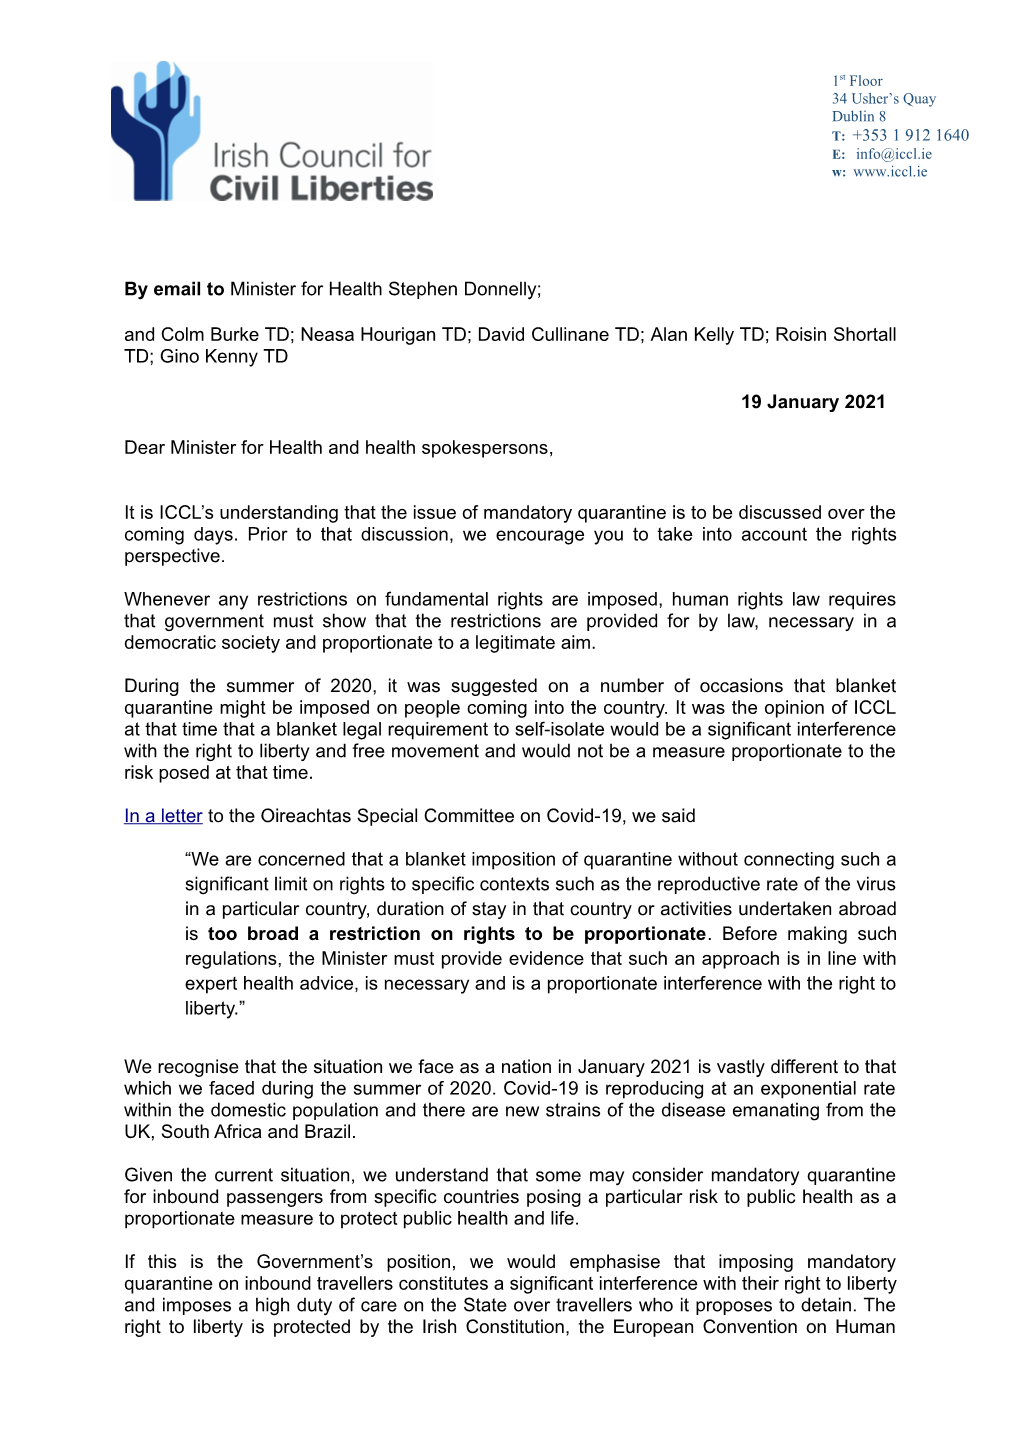 By Email to Minister for Health Stephen Donnelly; and Colm Burke TD; Neasa Hourigan TD; David Cullinane TD; Alan Kelly TD; Roisin Shortall TD; Gino Kenny TD